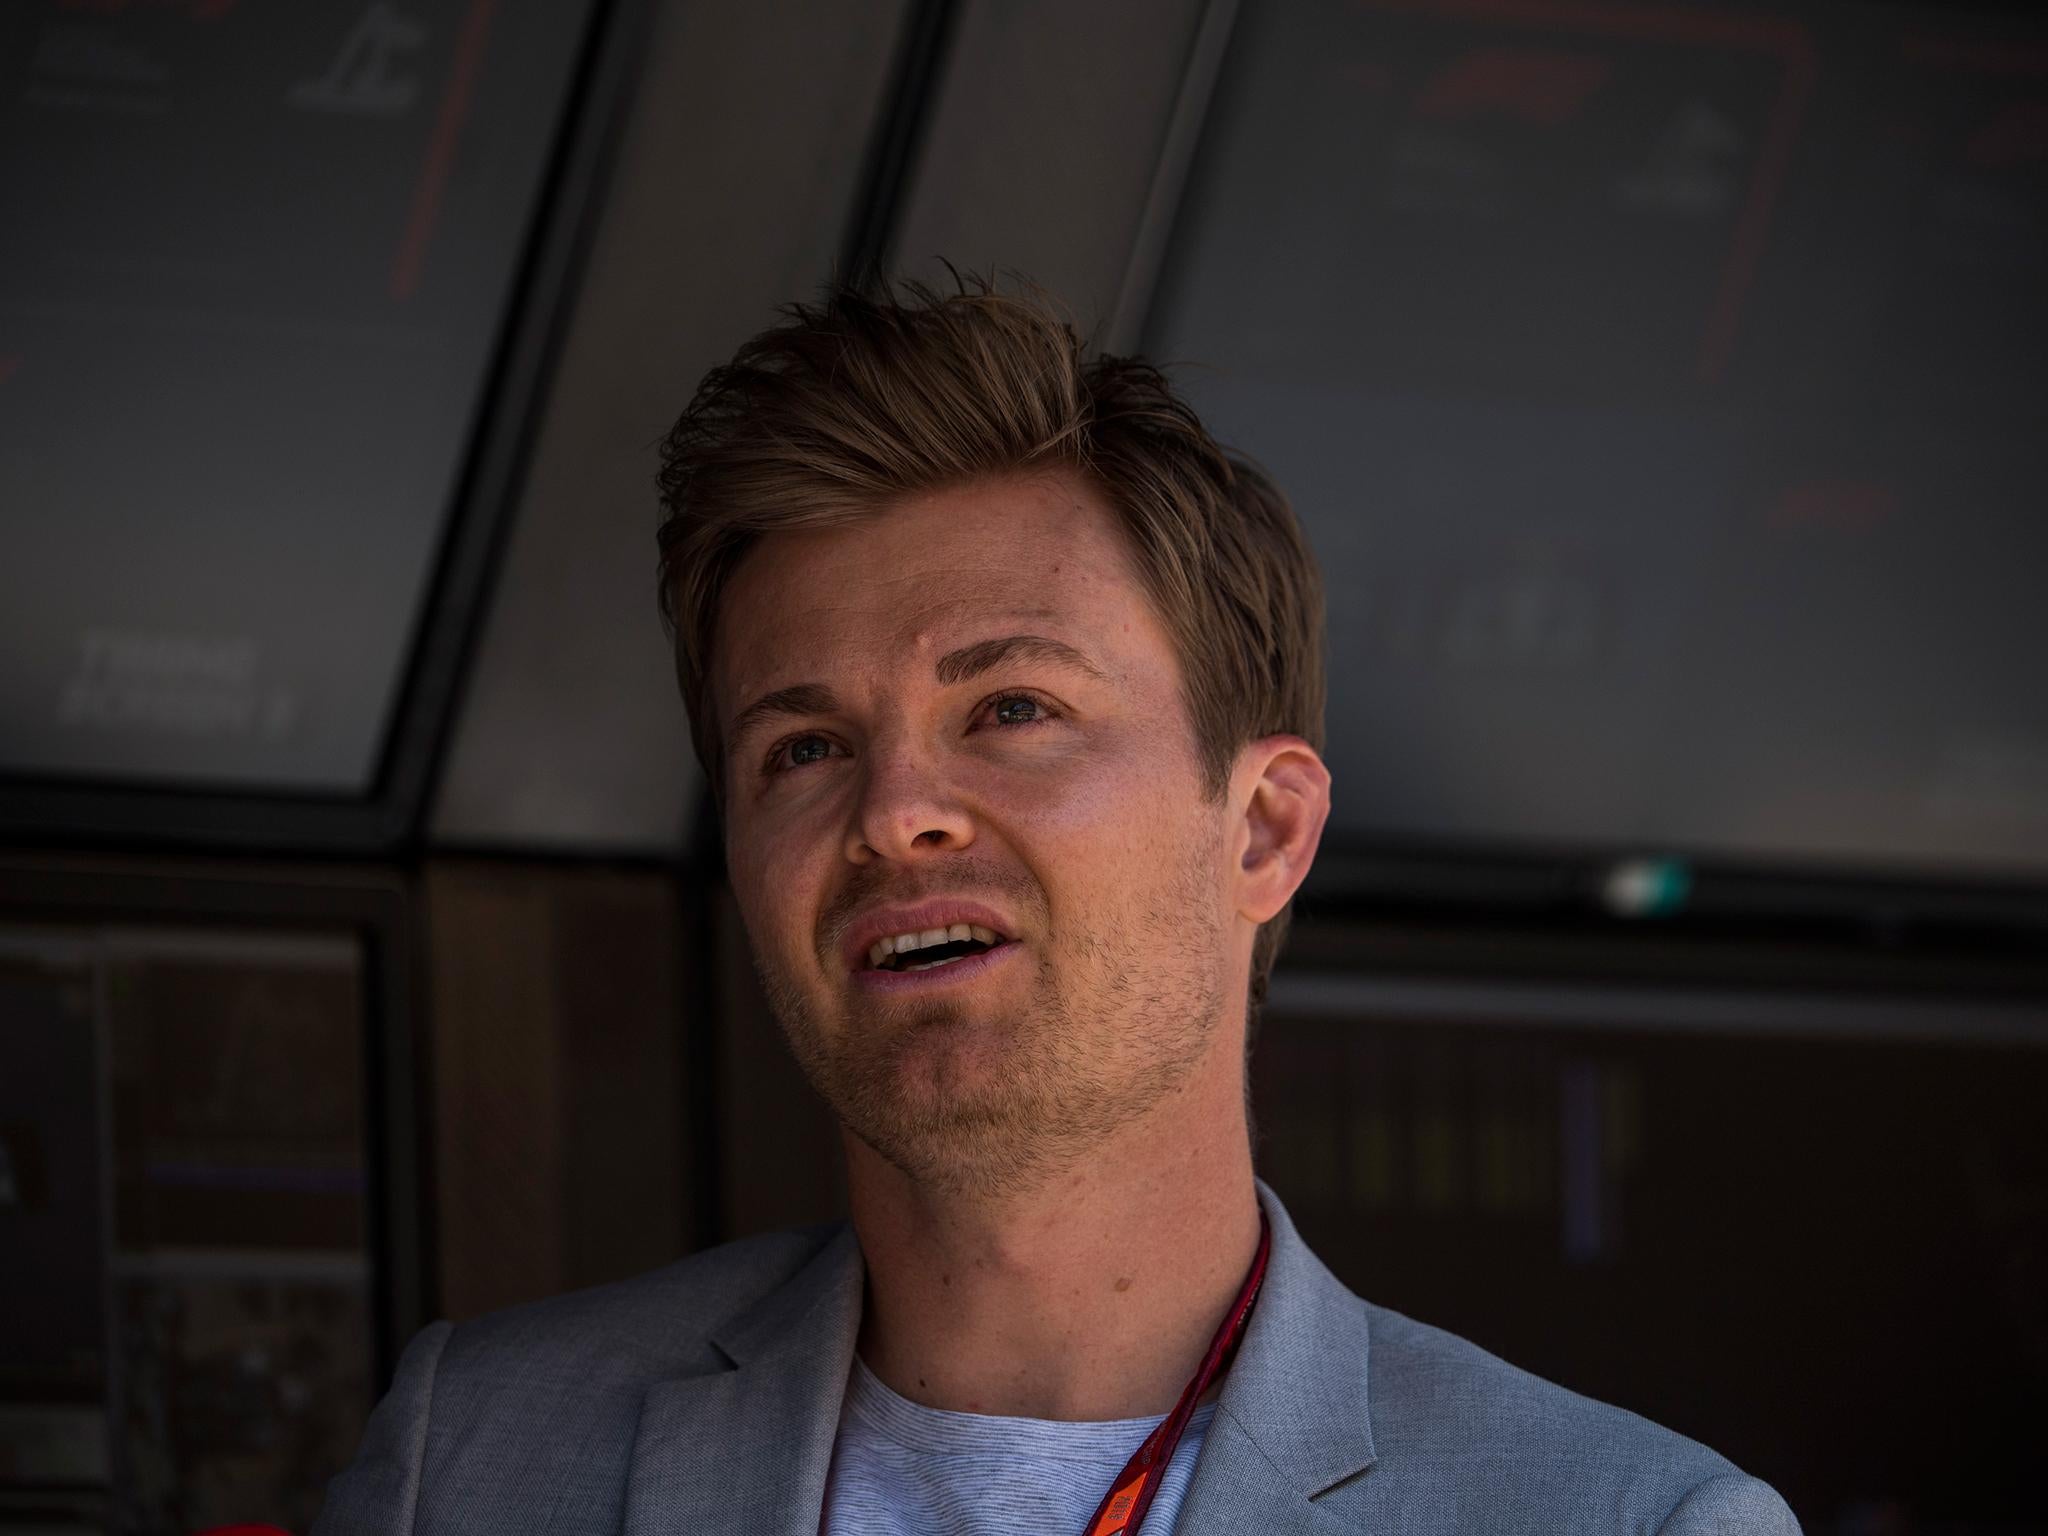 Nico Rosberg will be part of a new F1 post-race show broadcast on Twitter